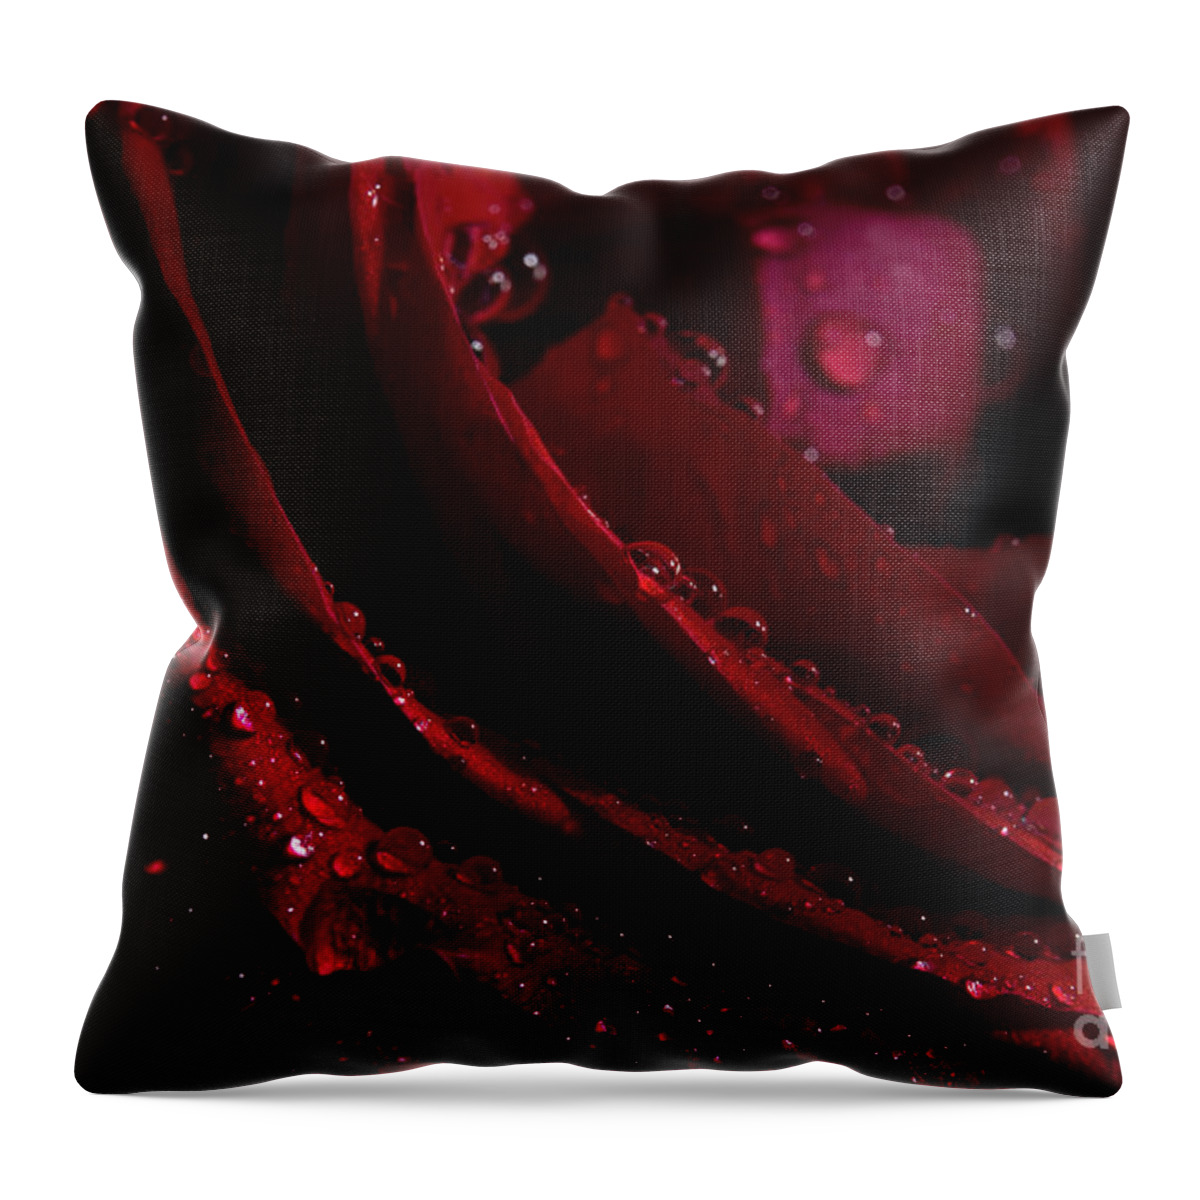 Rose Throw Pillow featuring the photograph Droplets On The Edge by Mike Eingle